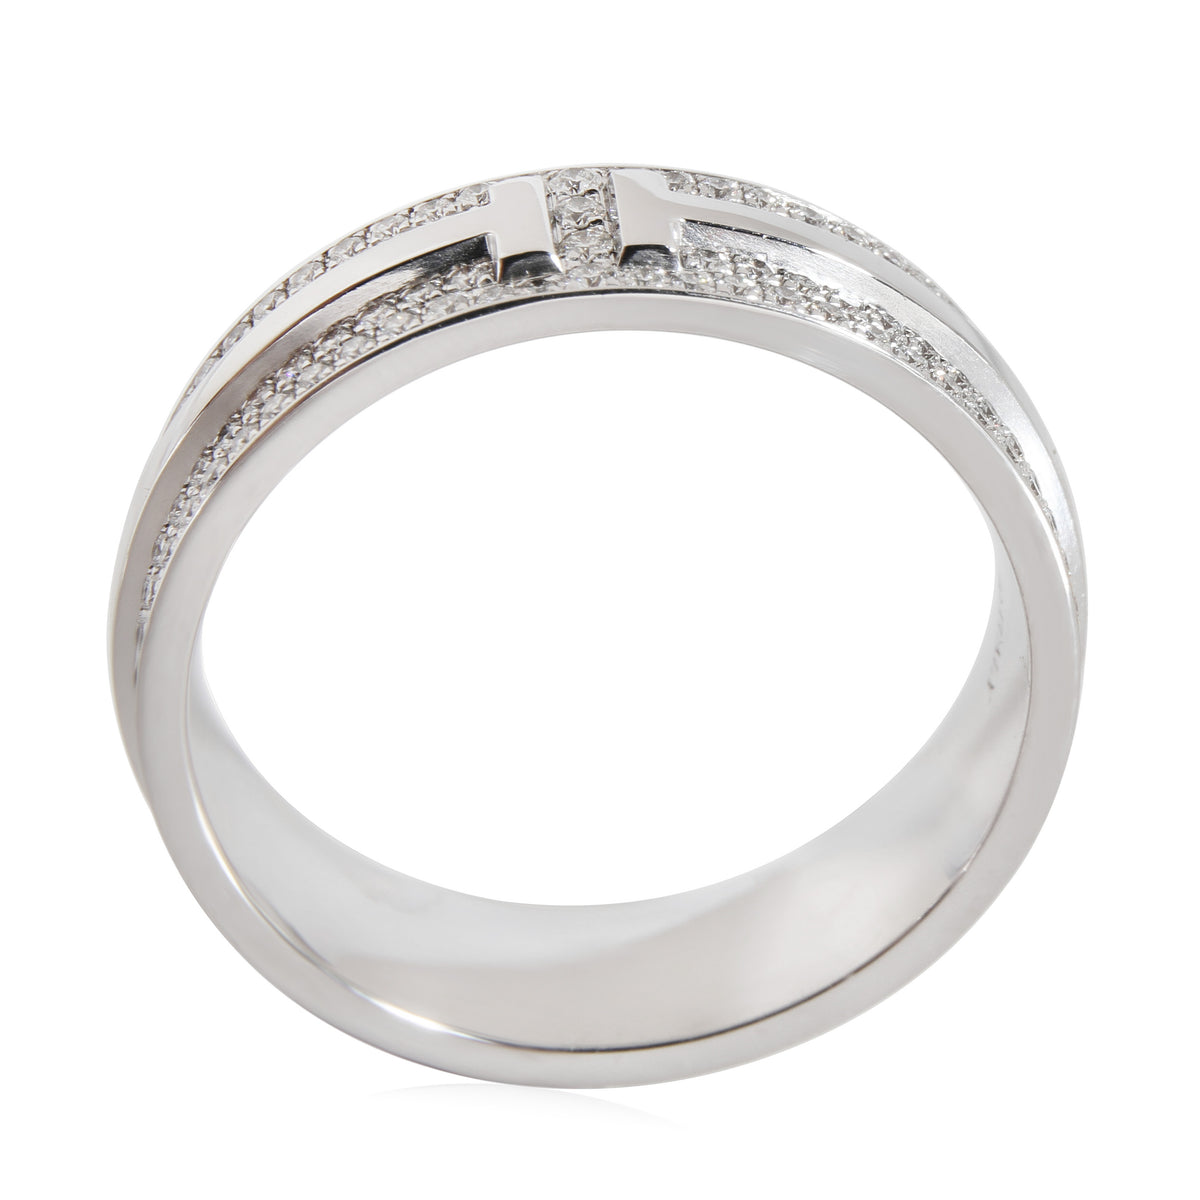 T Wide Pave Diamond Ring in 18K White Gold  0.63 Ctw